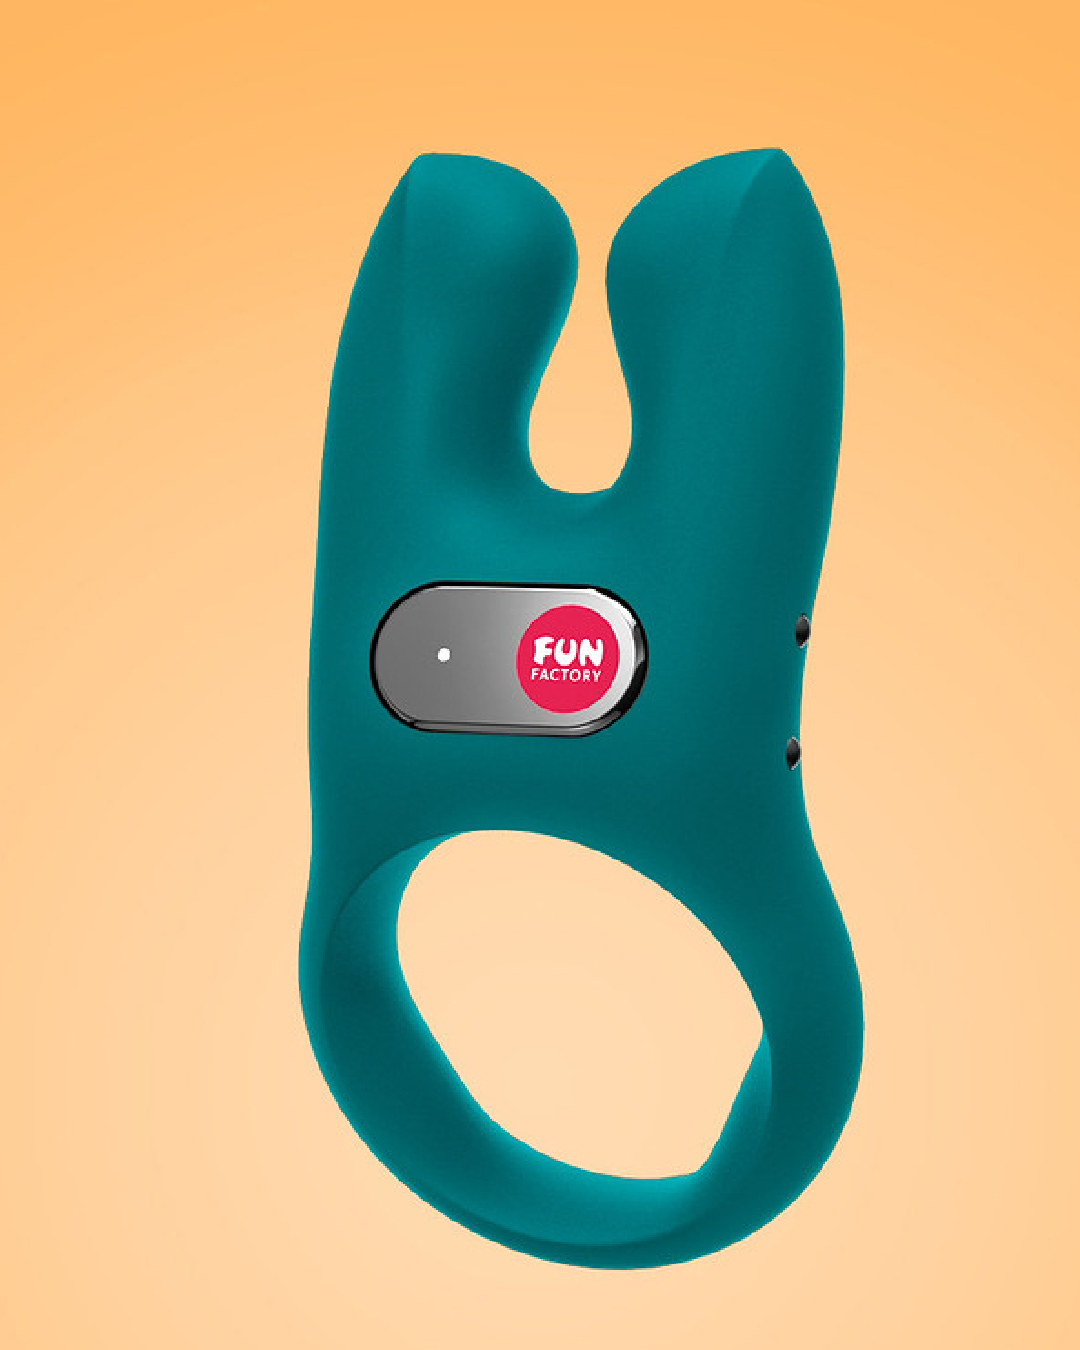 Fun Factory NŌS Vibrating Couples Penis Ring - Blue ANGLED SIDE VIEW ON YELLOW BACKGROUND